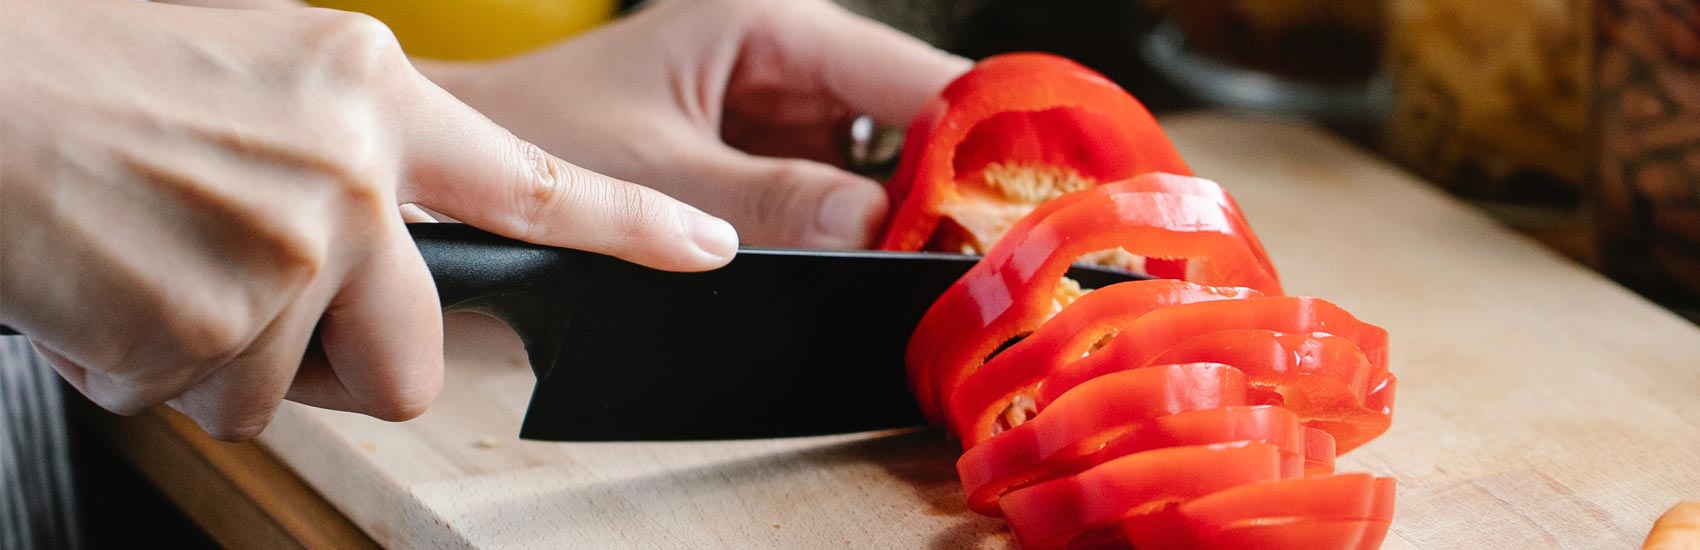 Tomatoes being sliced on a cutting board